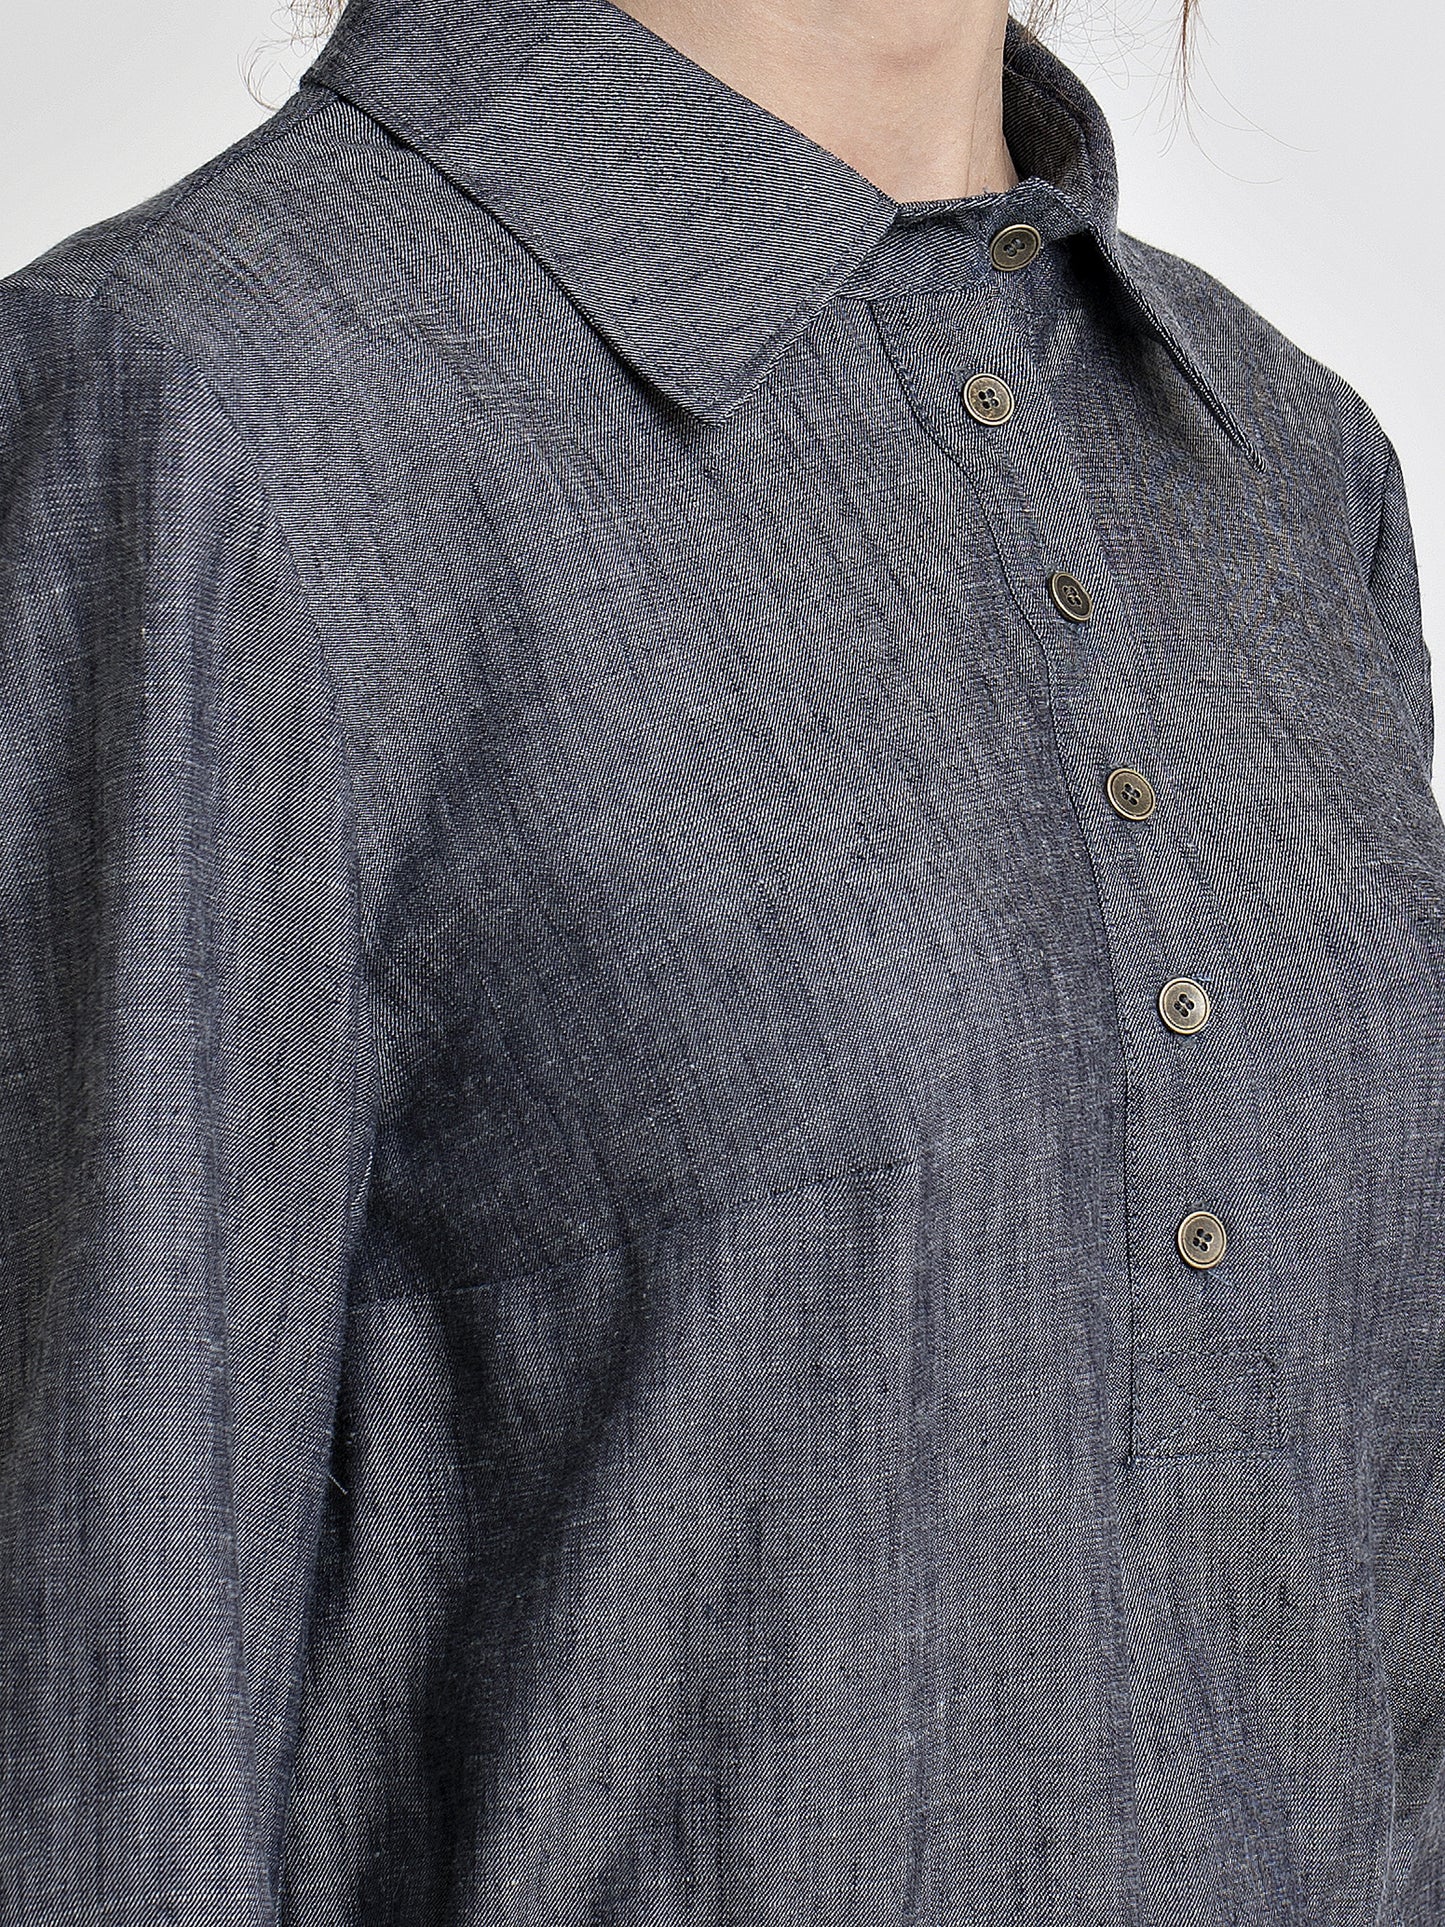 Placket close up view of a female model wearing a long sleeve denim dress. From the RÉZO women's collection.